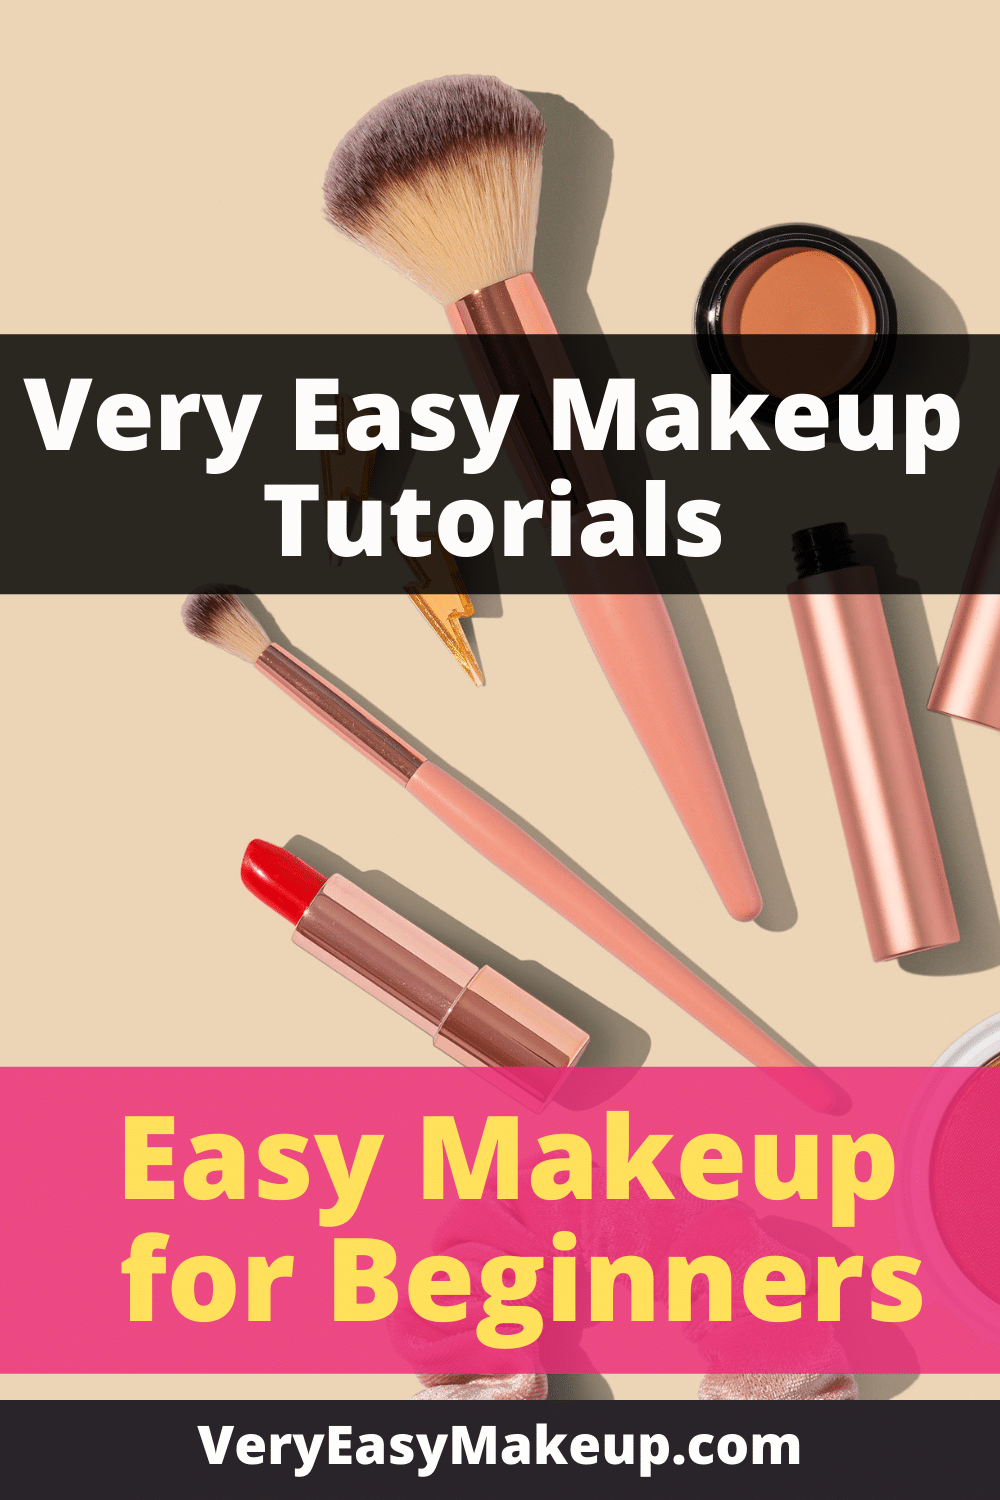 Very Easy Makeup Tutorials and Easy Makeup for Beginners by Very Easy Makeup